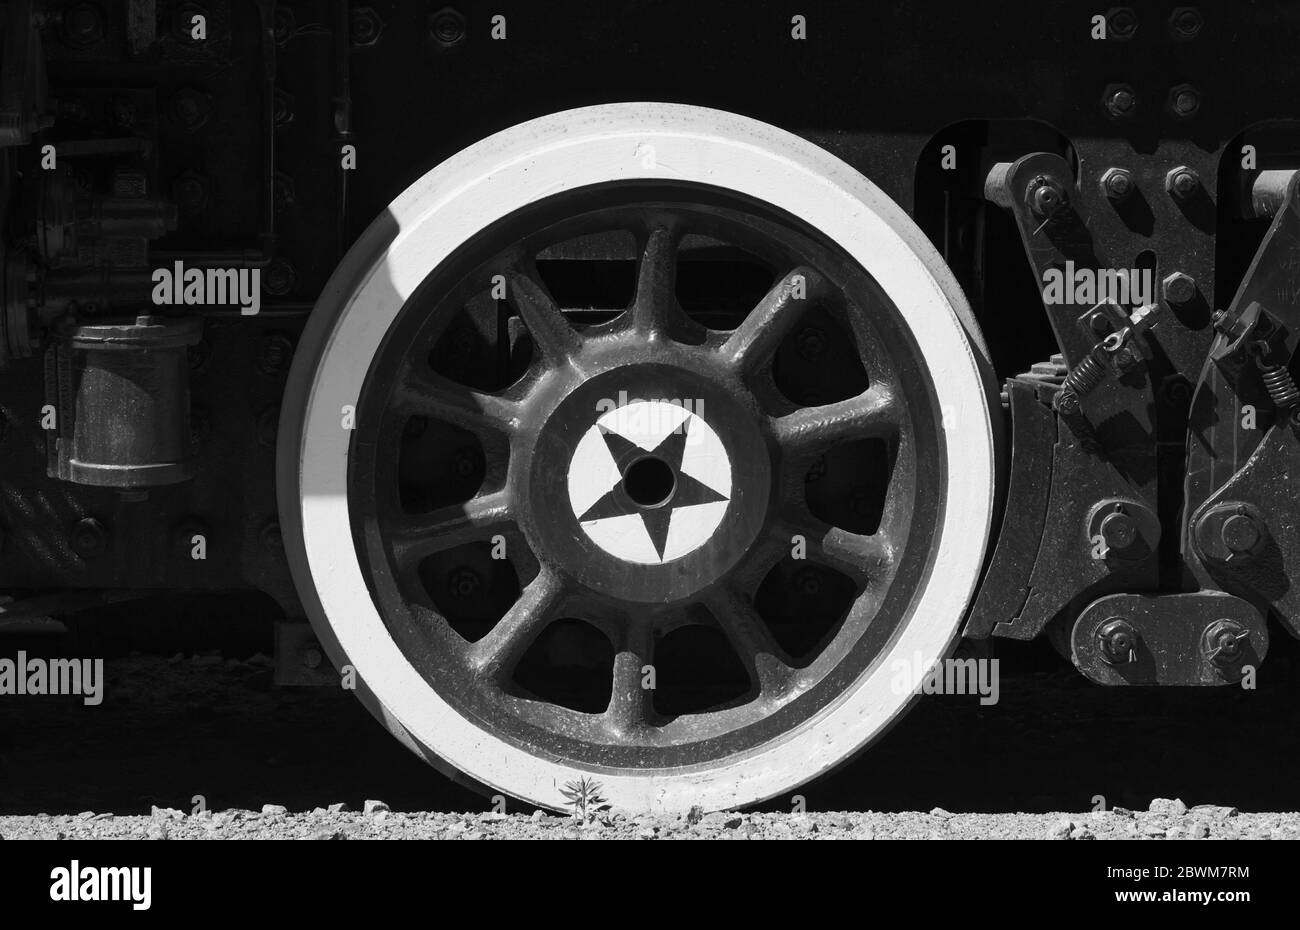 Old wheel with star of a Soviet military steam locomotive from WWII period, black and white photo Stock Photo